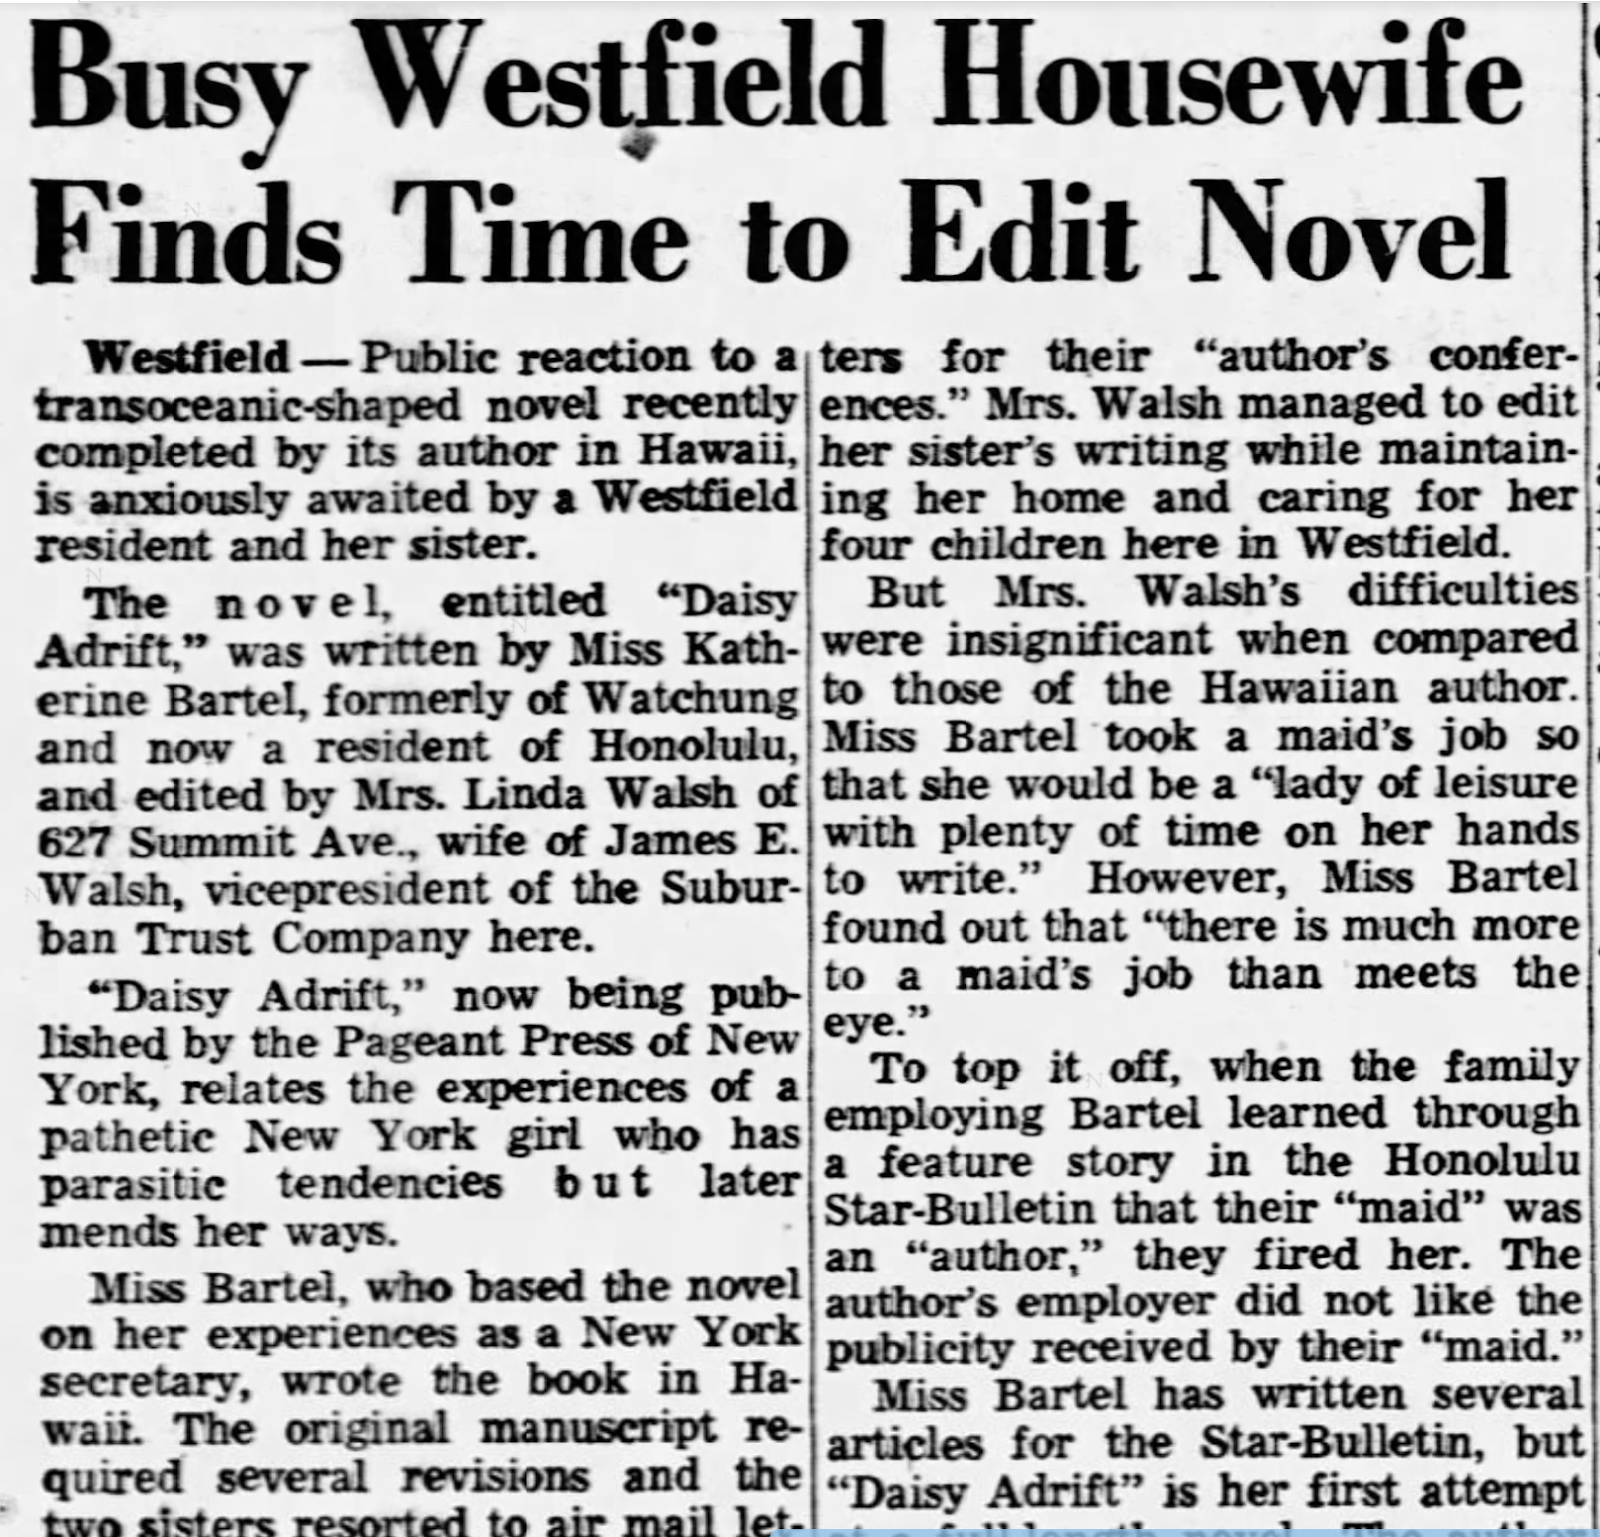 "Public reaction to a transoceanic-shaped novel recently completed by its author in Hawaii, is anxiously awaited by a Westfield resident and her sister [a busy housewife]."